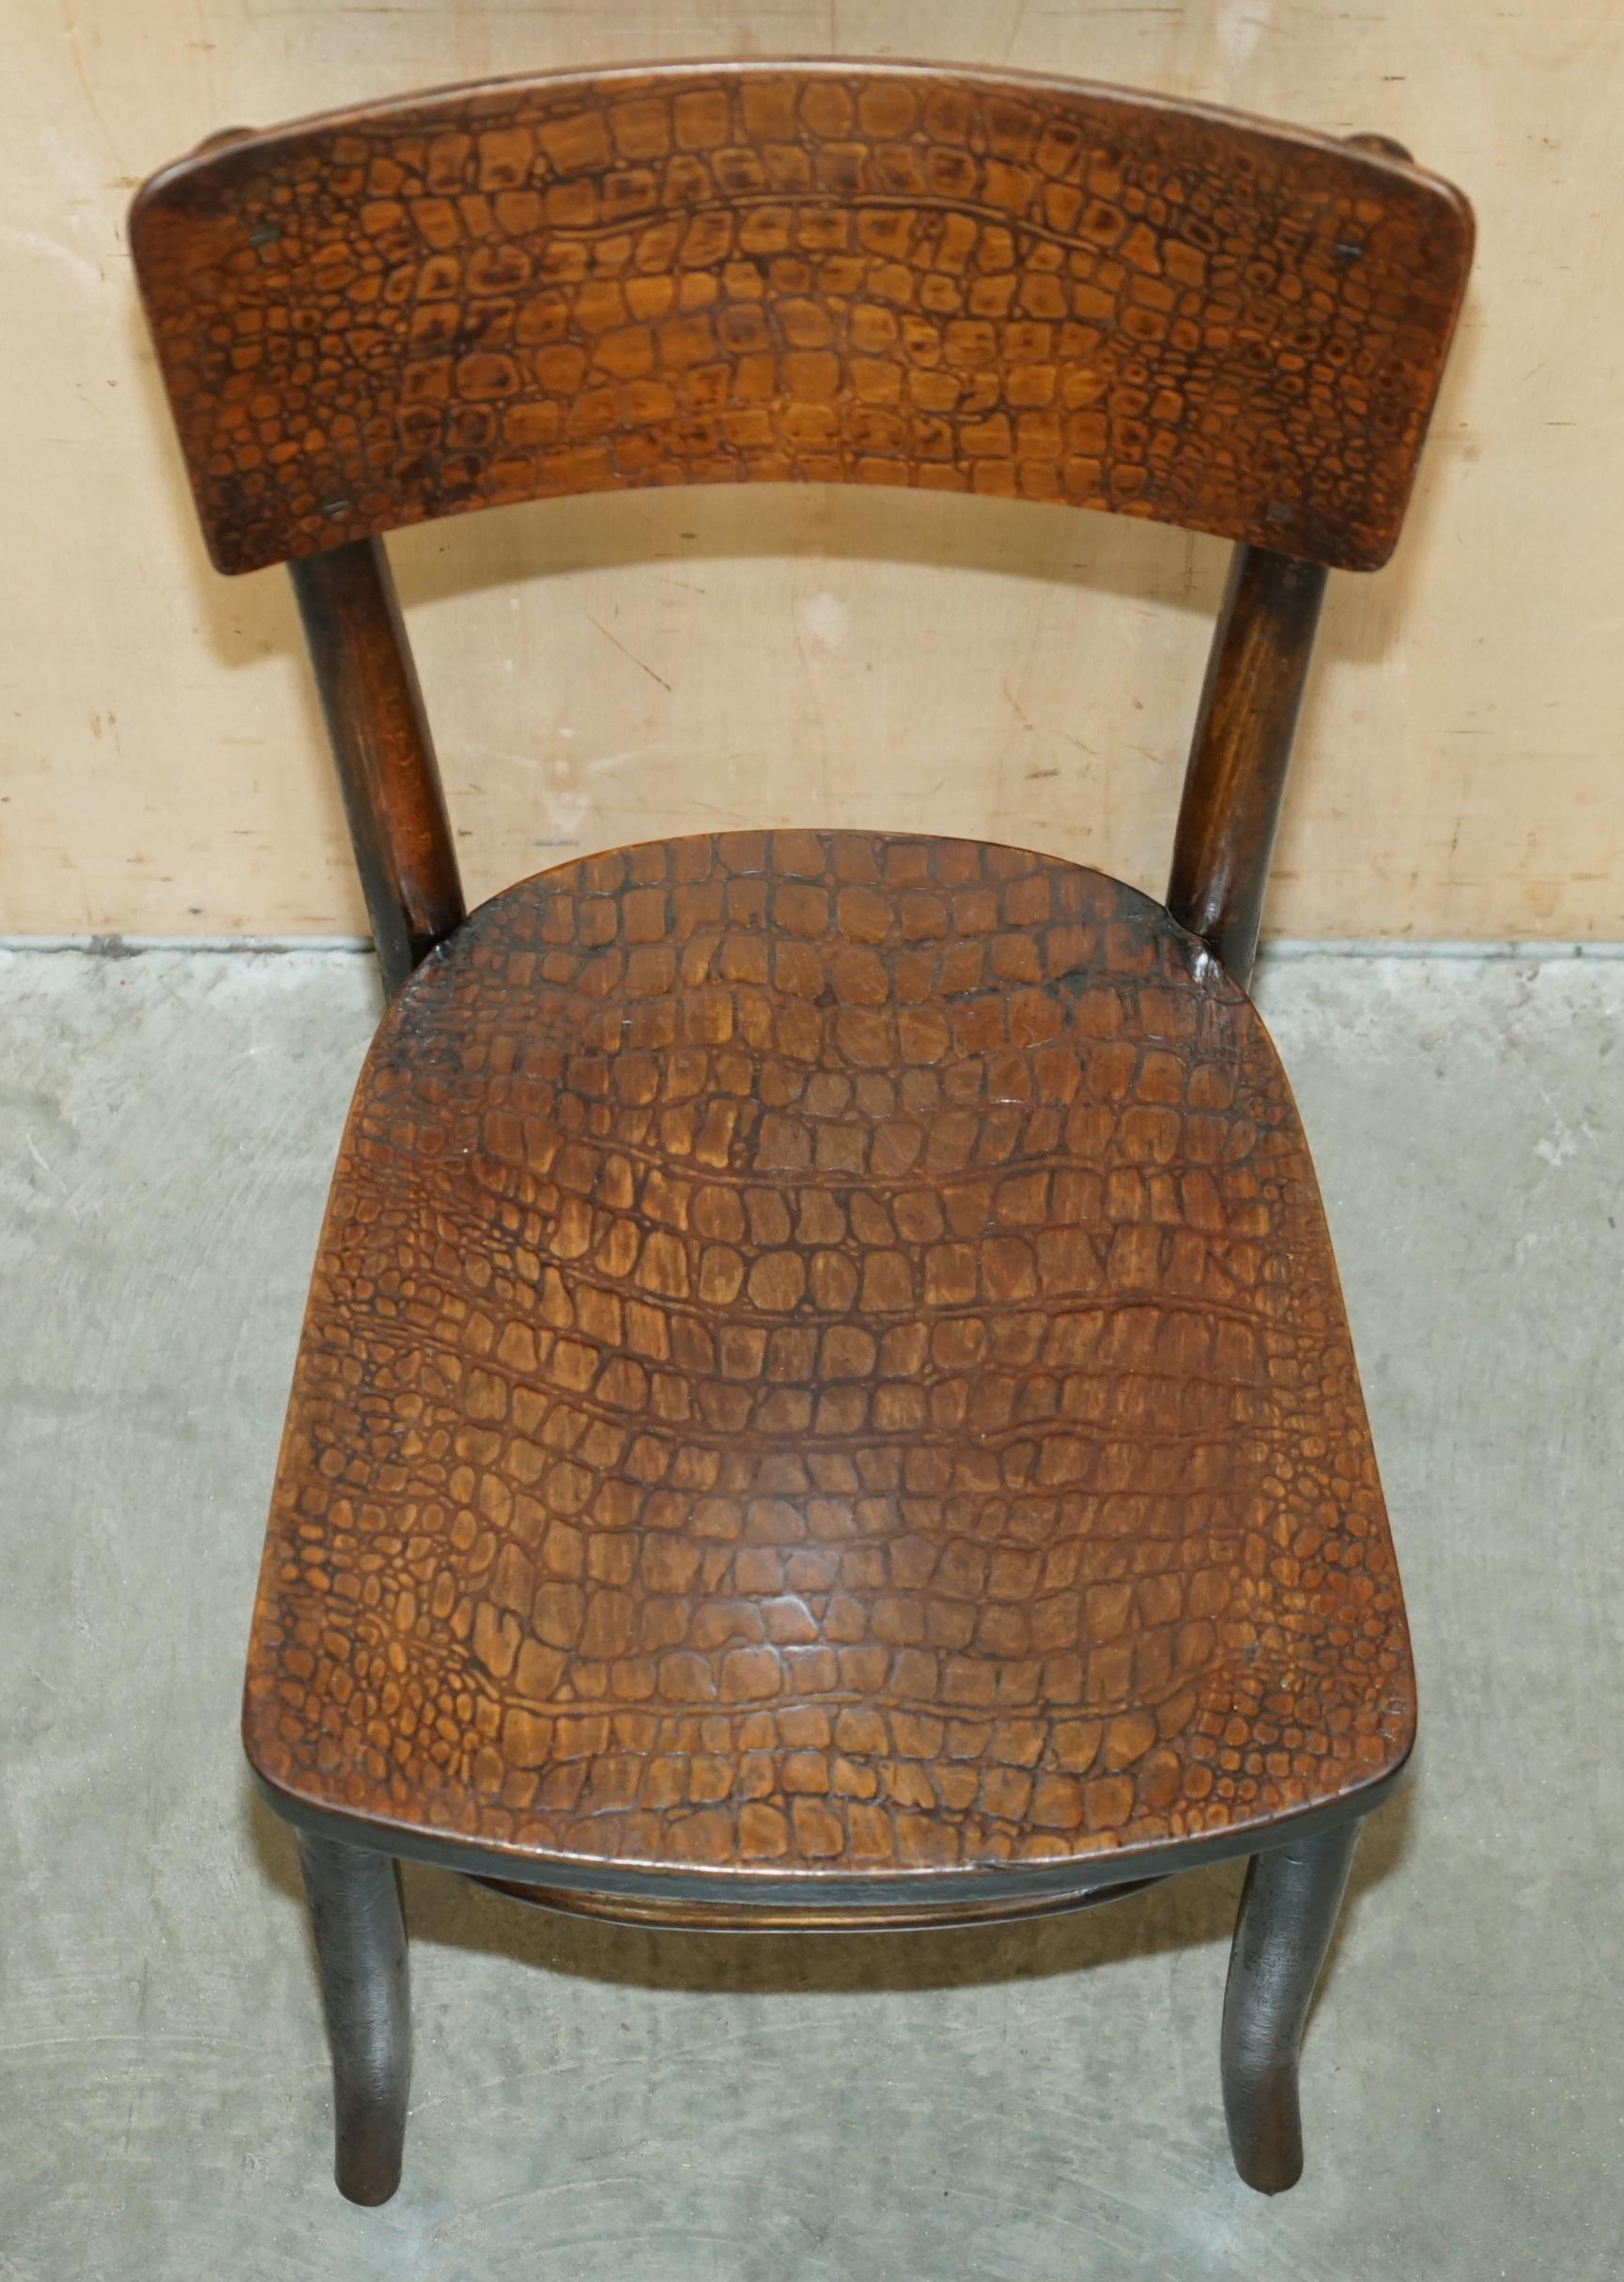 FOUR FiNE ANTIQUE THONET CROCODILE ALLIGATOR CARVED WOOD PATINA DINING CHAIRS 4 For Sale 3